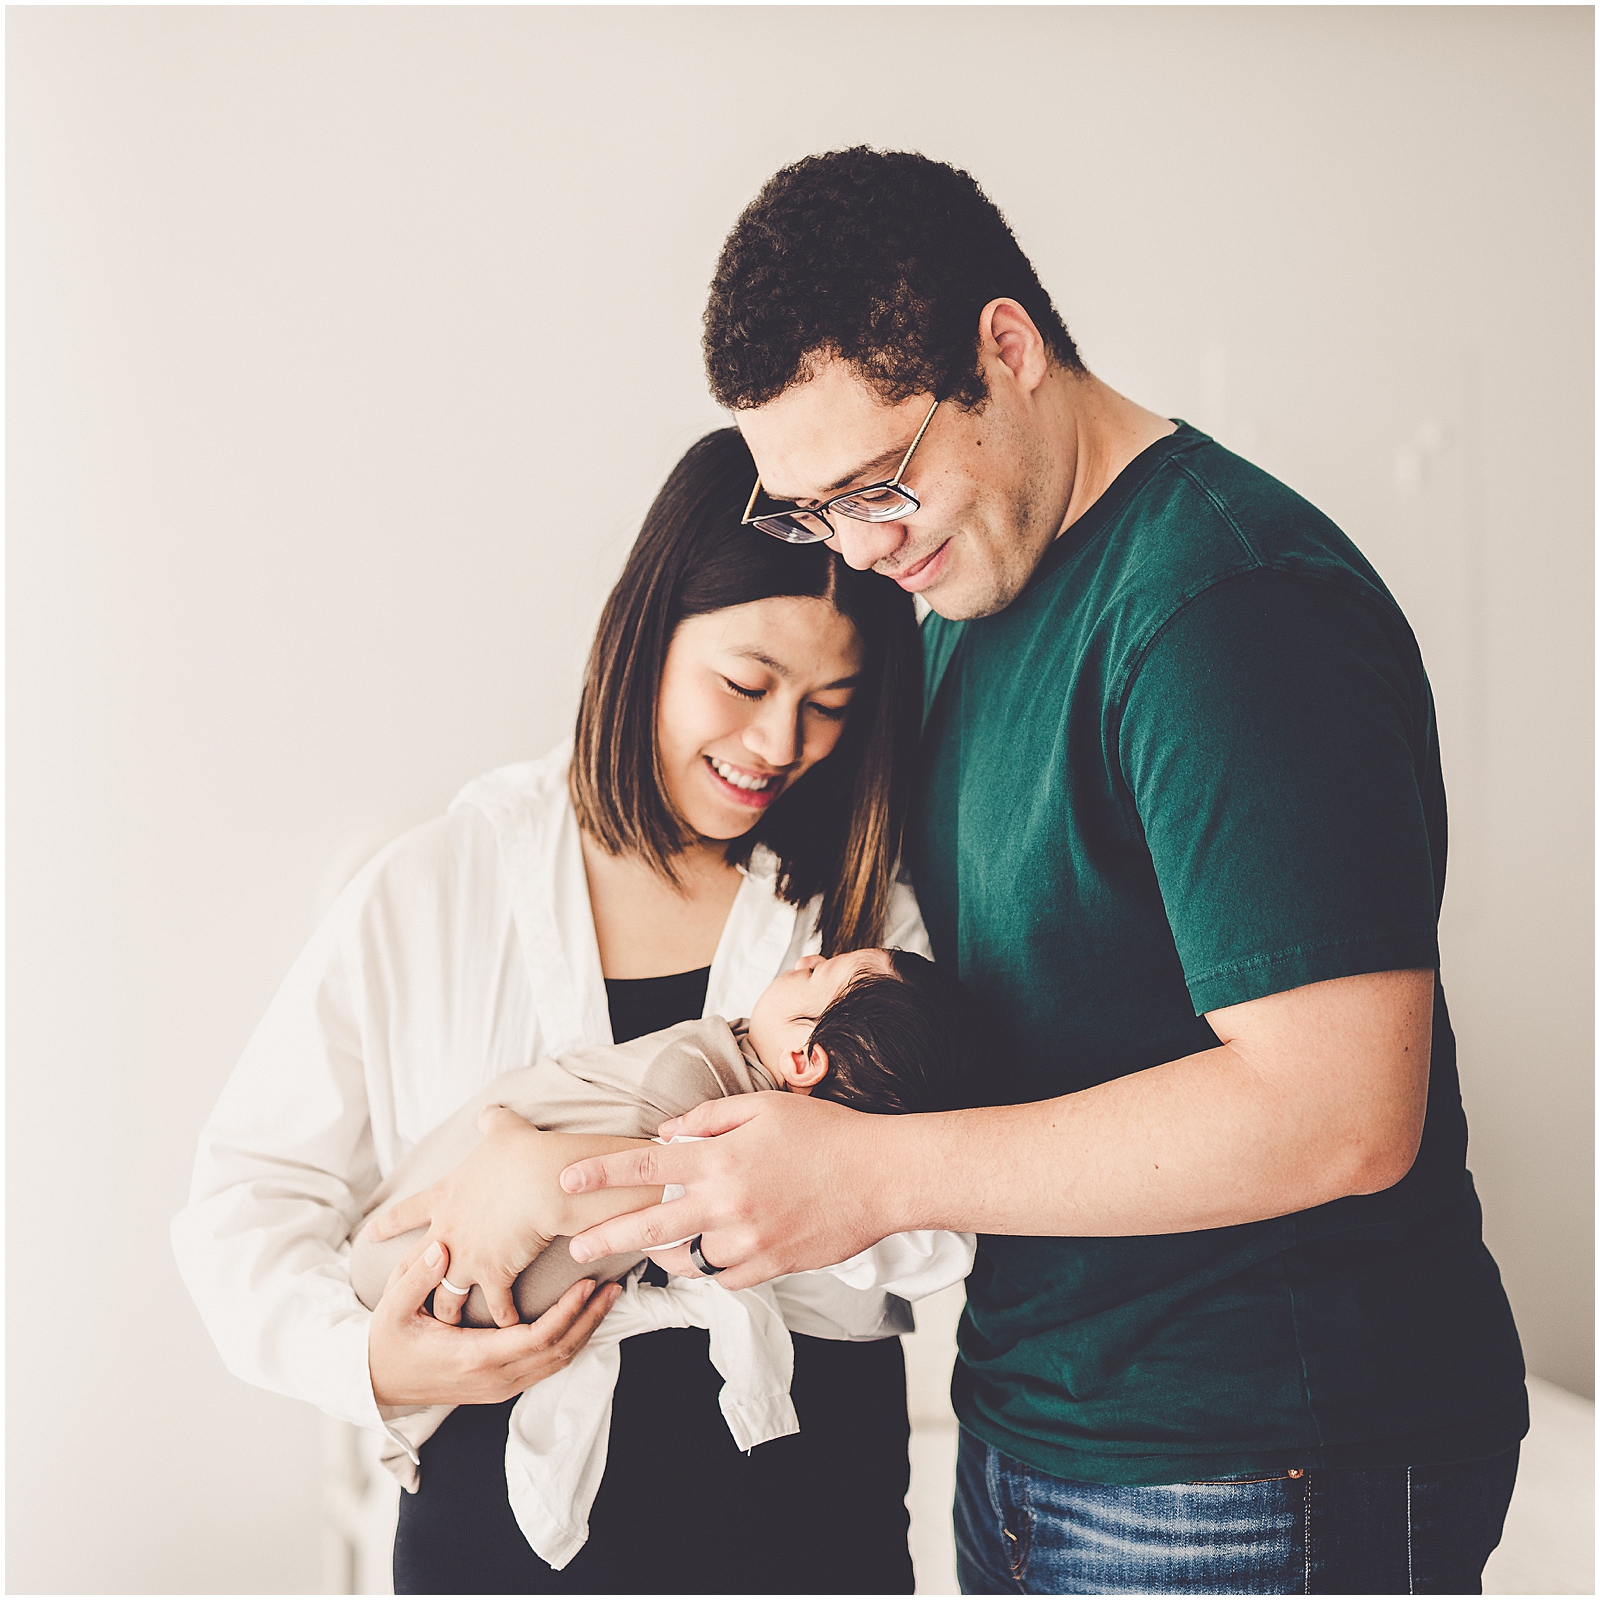 Natural light newborn session at Studio 388 in Kankakee with the Sanders family and Bourbonnais family photographer Kara Evans Photographer.